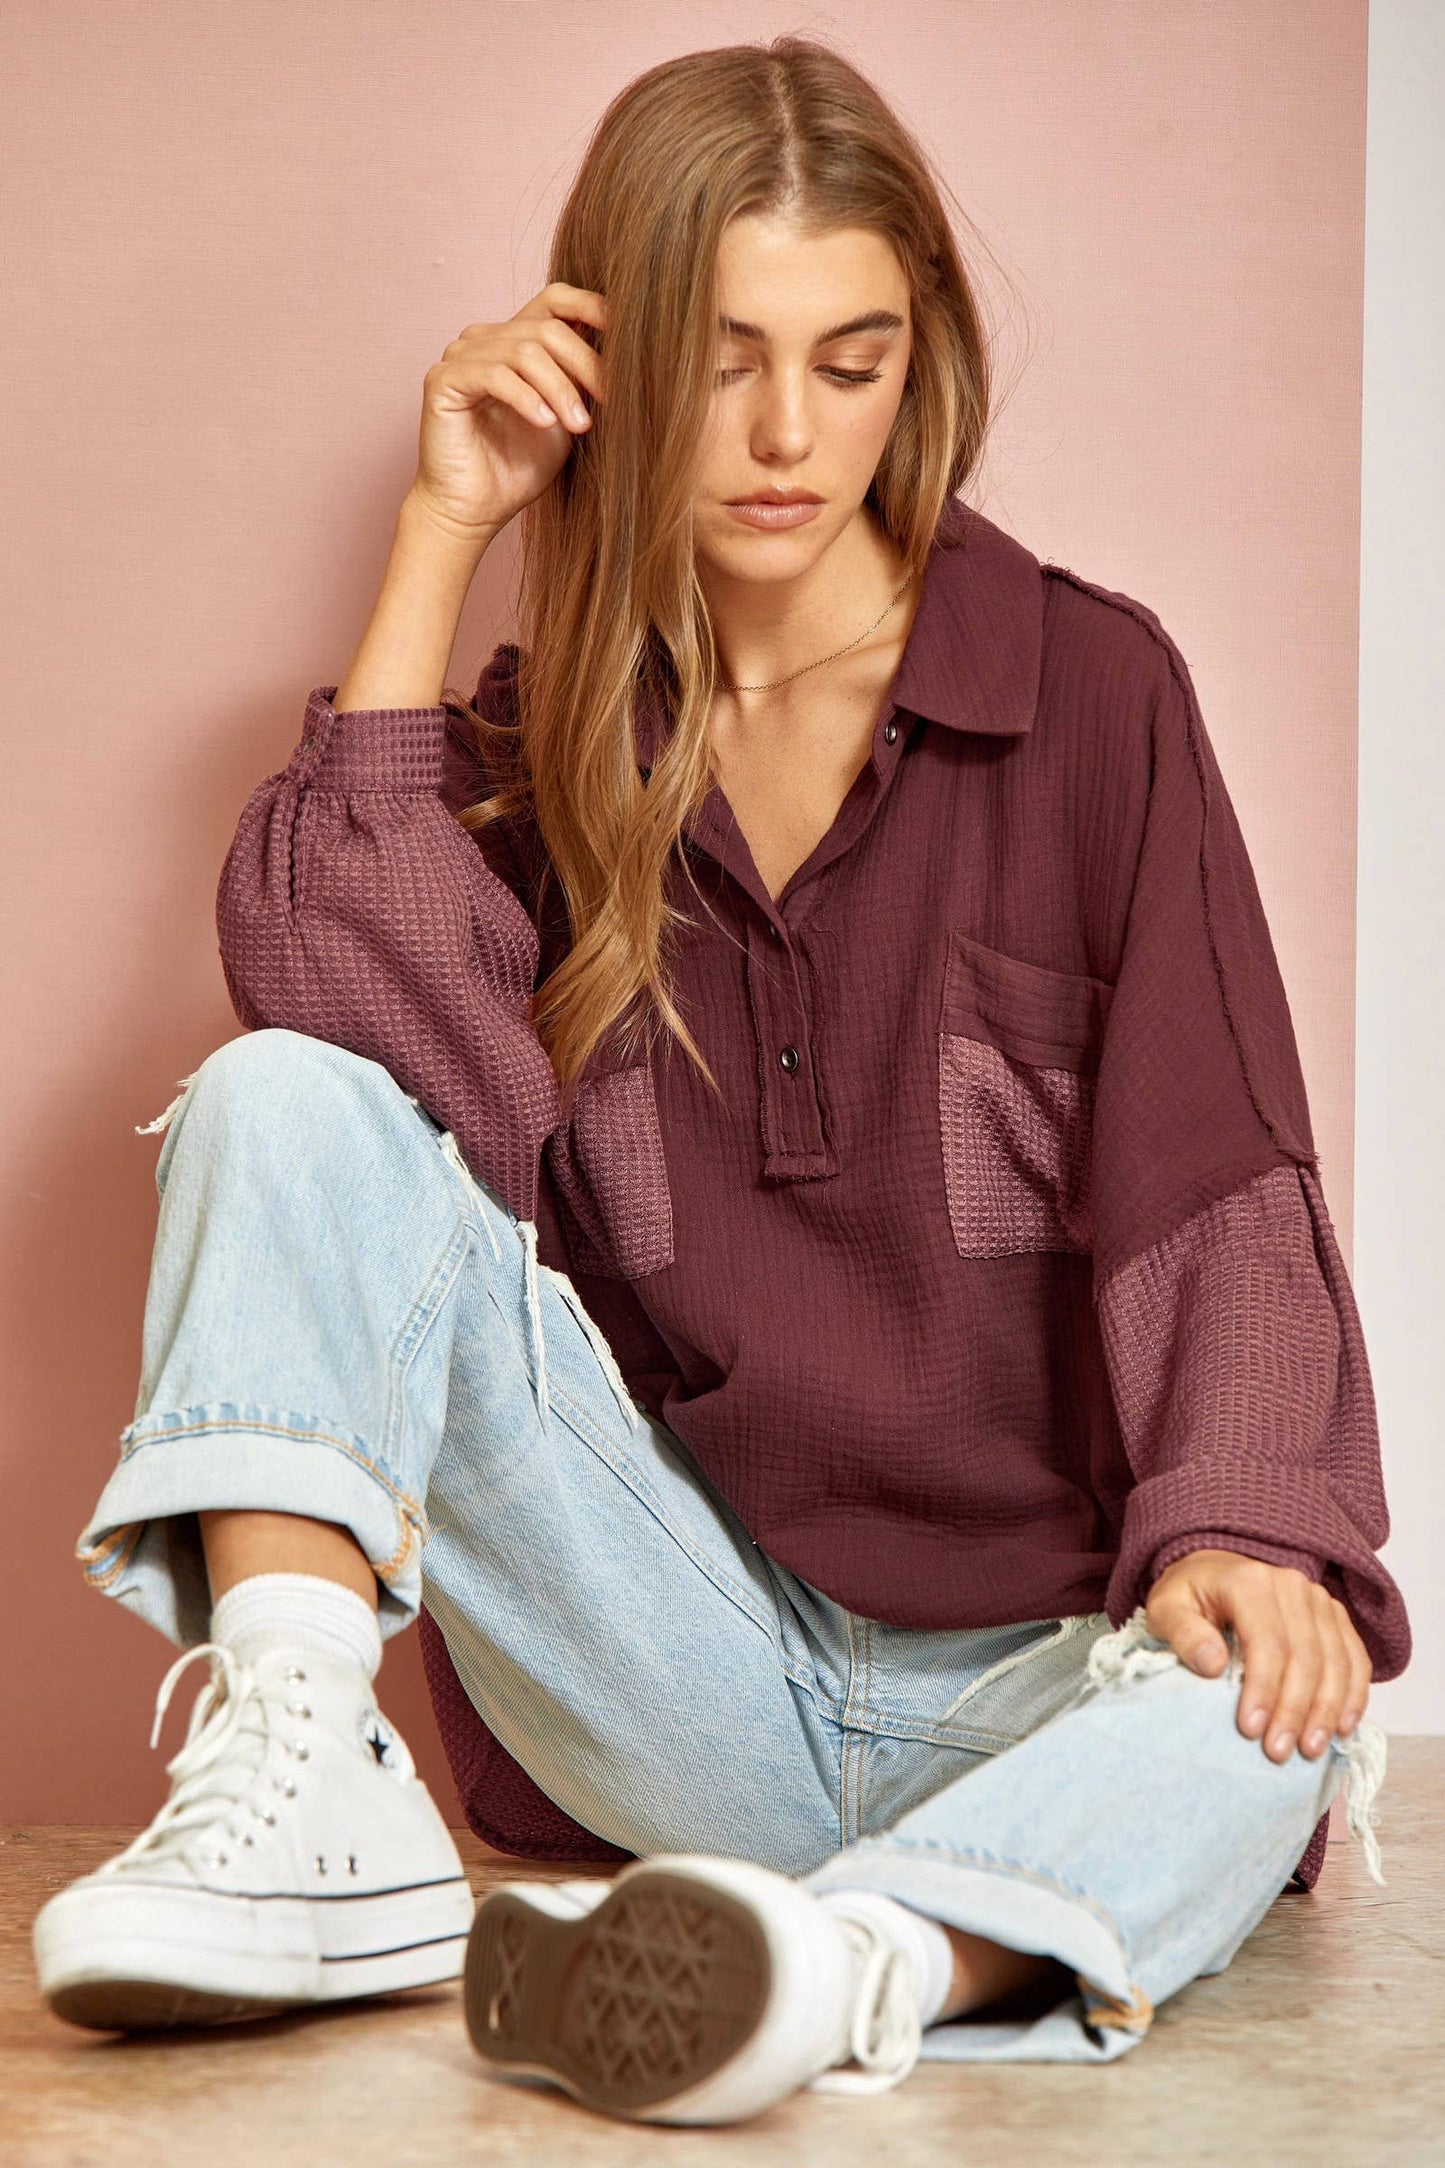 Gauze Knit Top With Collar: S / PLUM - Storm and Sky Shoppe - Andrée by Unit